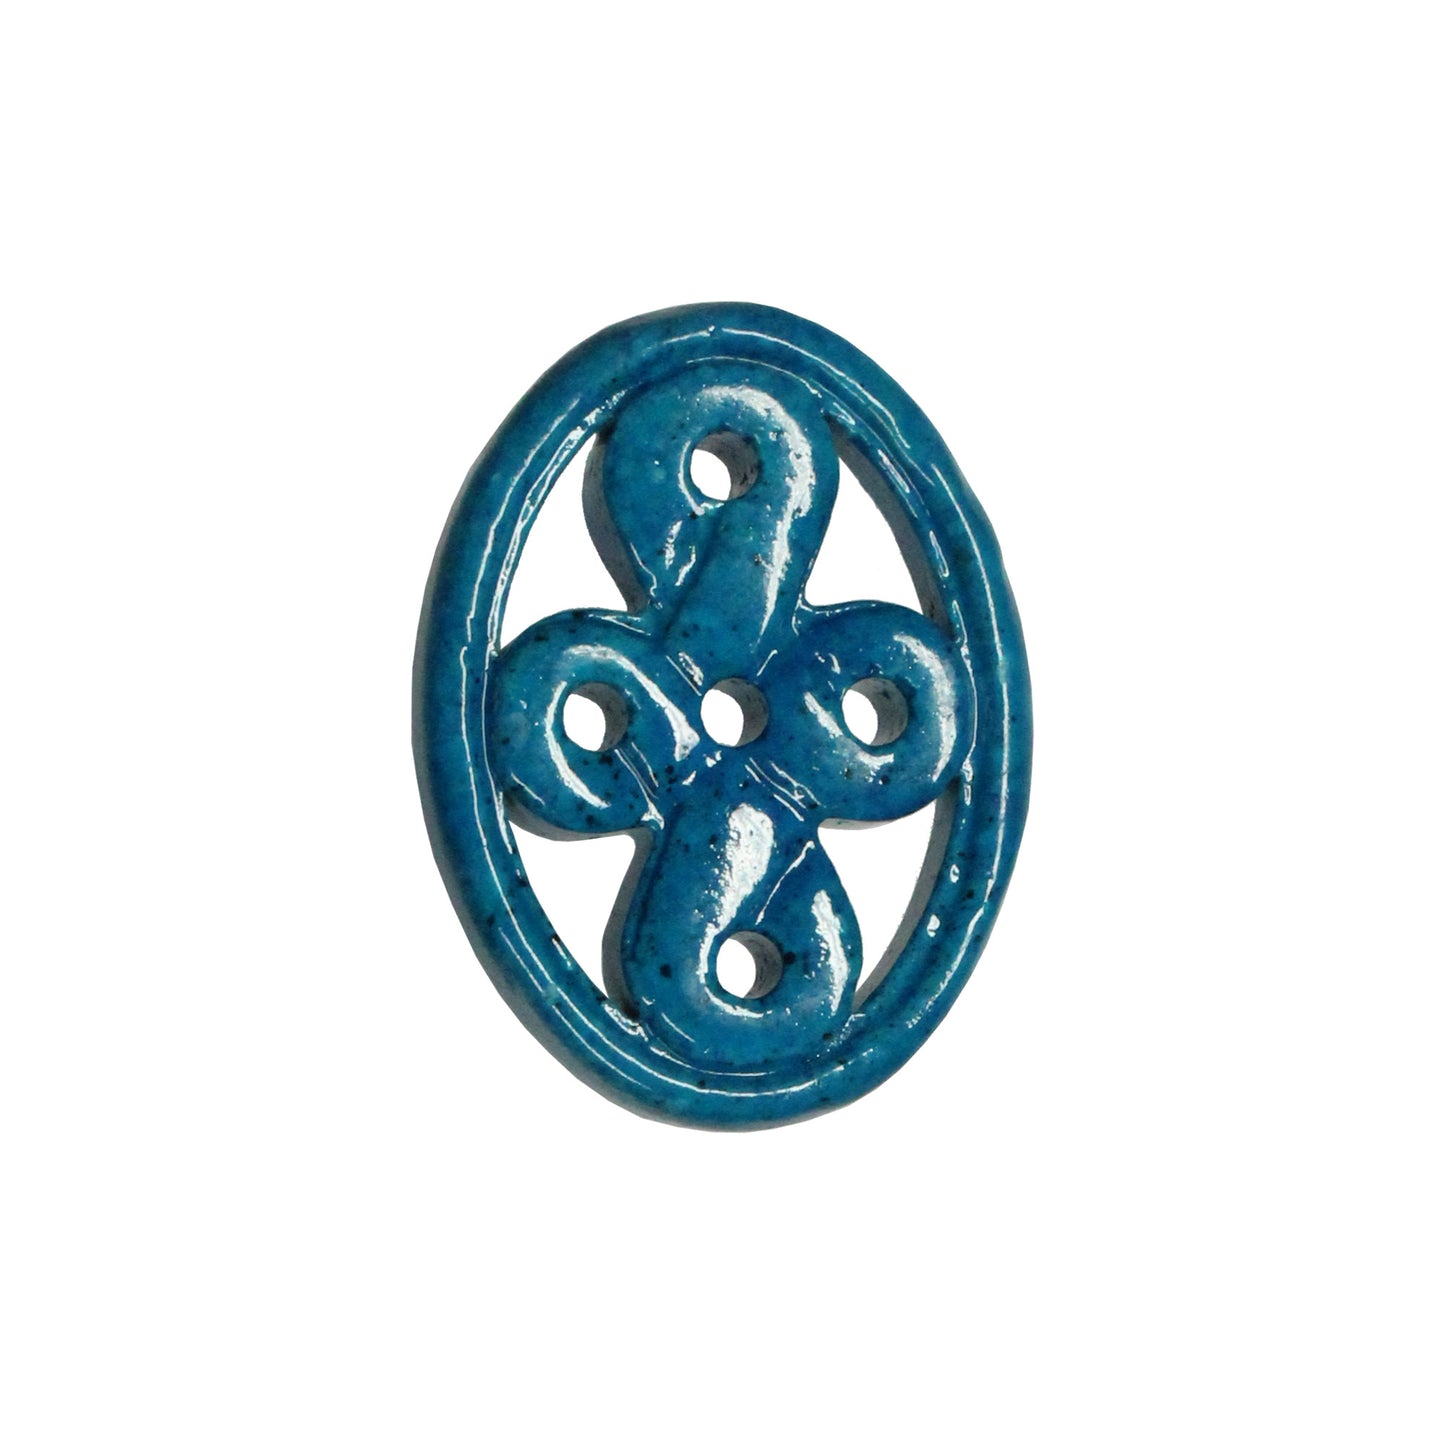 Celtic Oval Pendant / dyed chalk blue turquoise / 35mm (H) x 26mm (W) x 6mm Thk